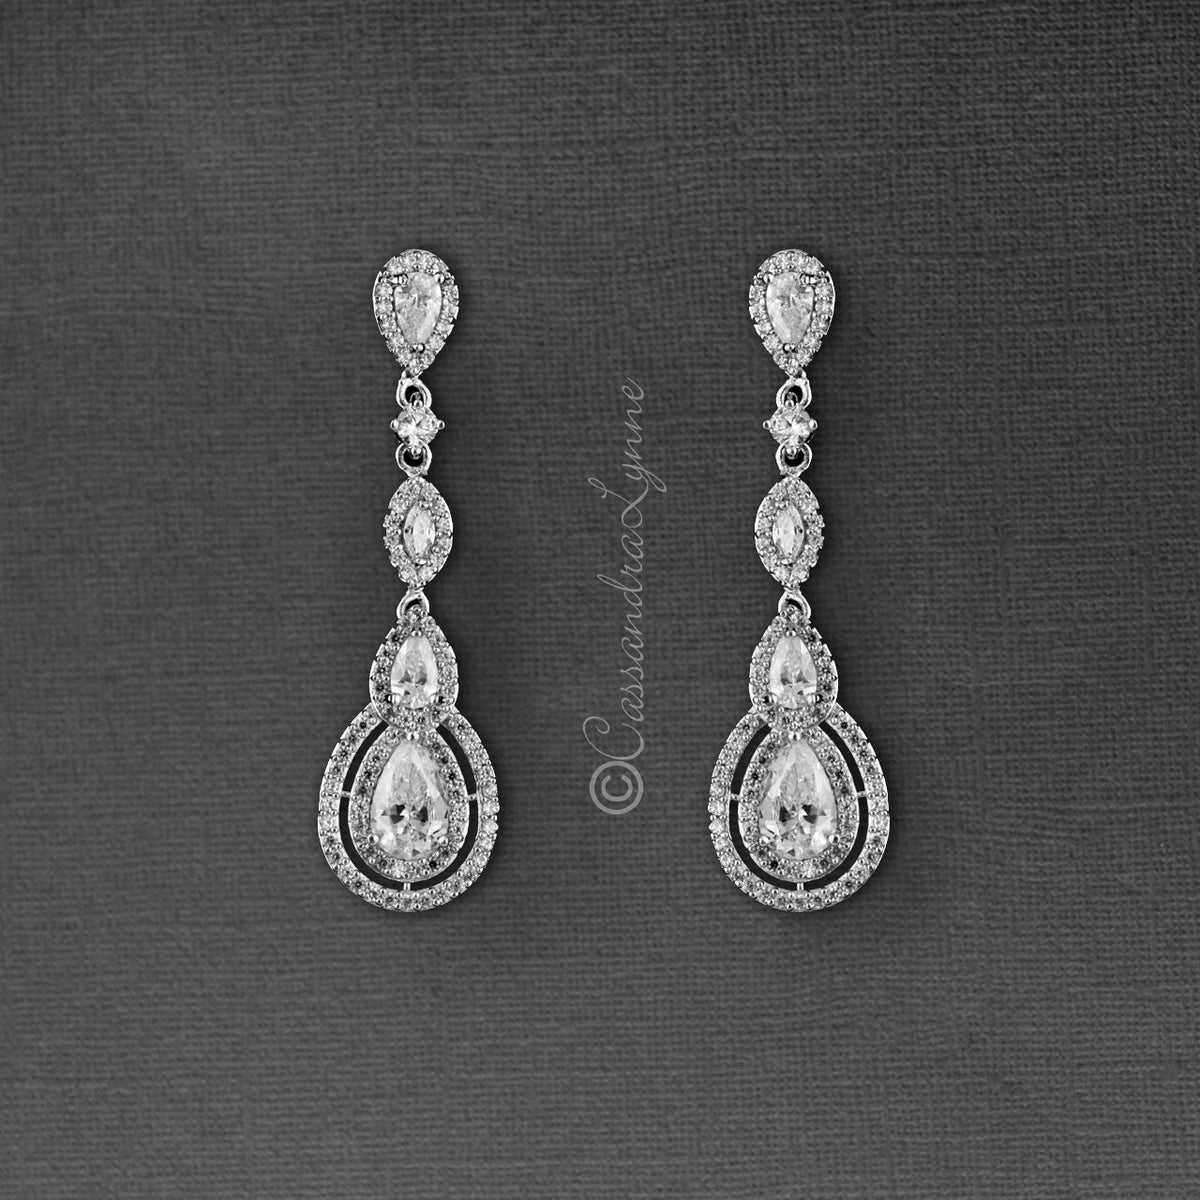 Cubic Zirconia Earrings Pave Teardrop and Marquise - Cassandra Lynne